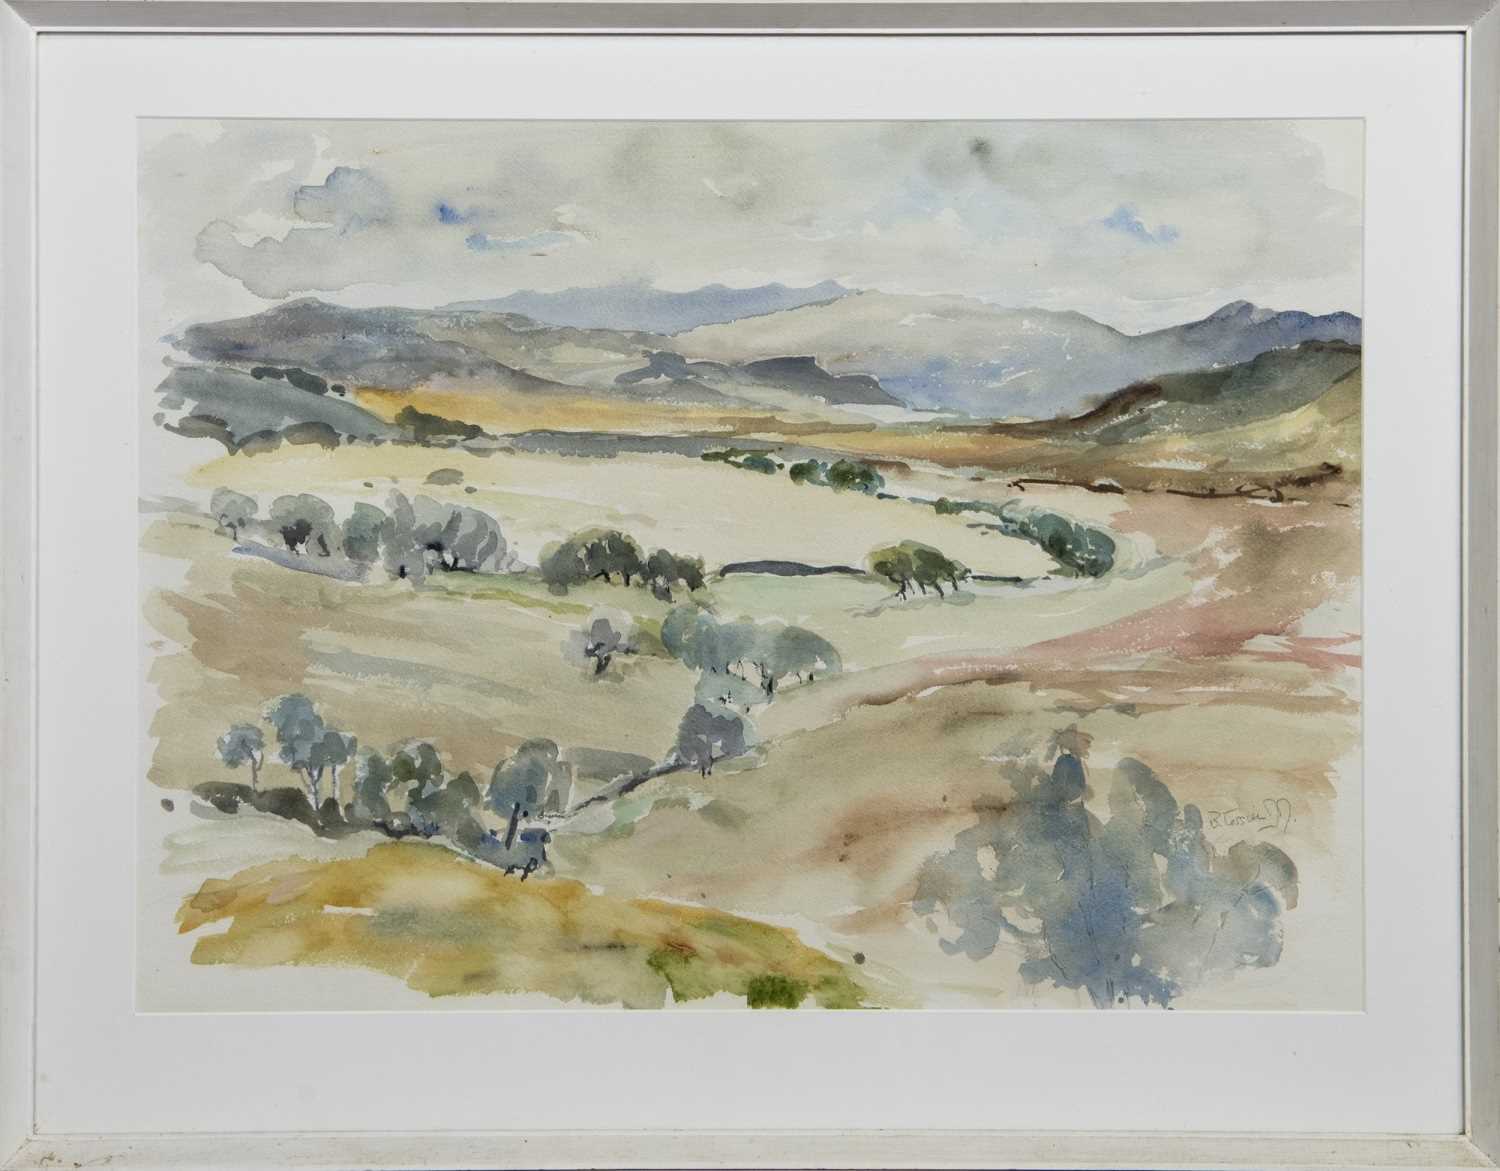 Lot 18 - NEAR LOCHINVER, A WATERCOLOUR BY BEATRICE TESSIER-MCMURTRIE